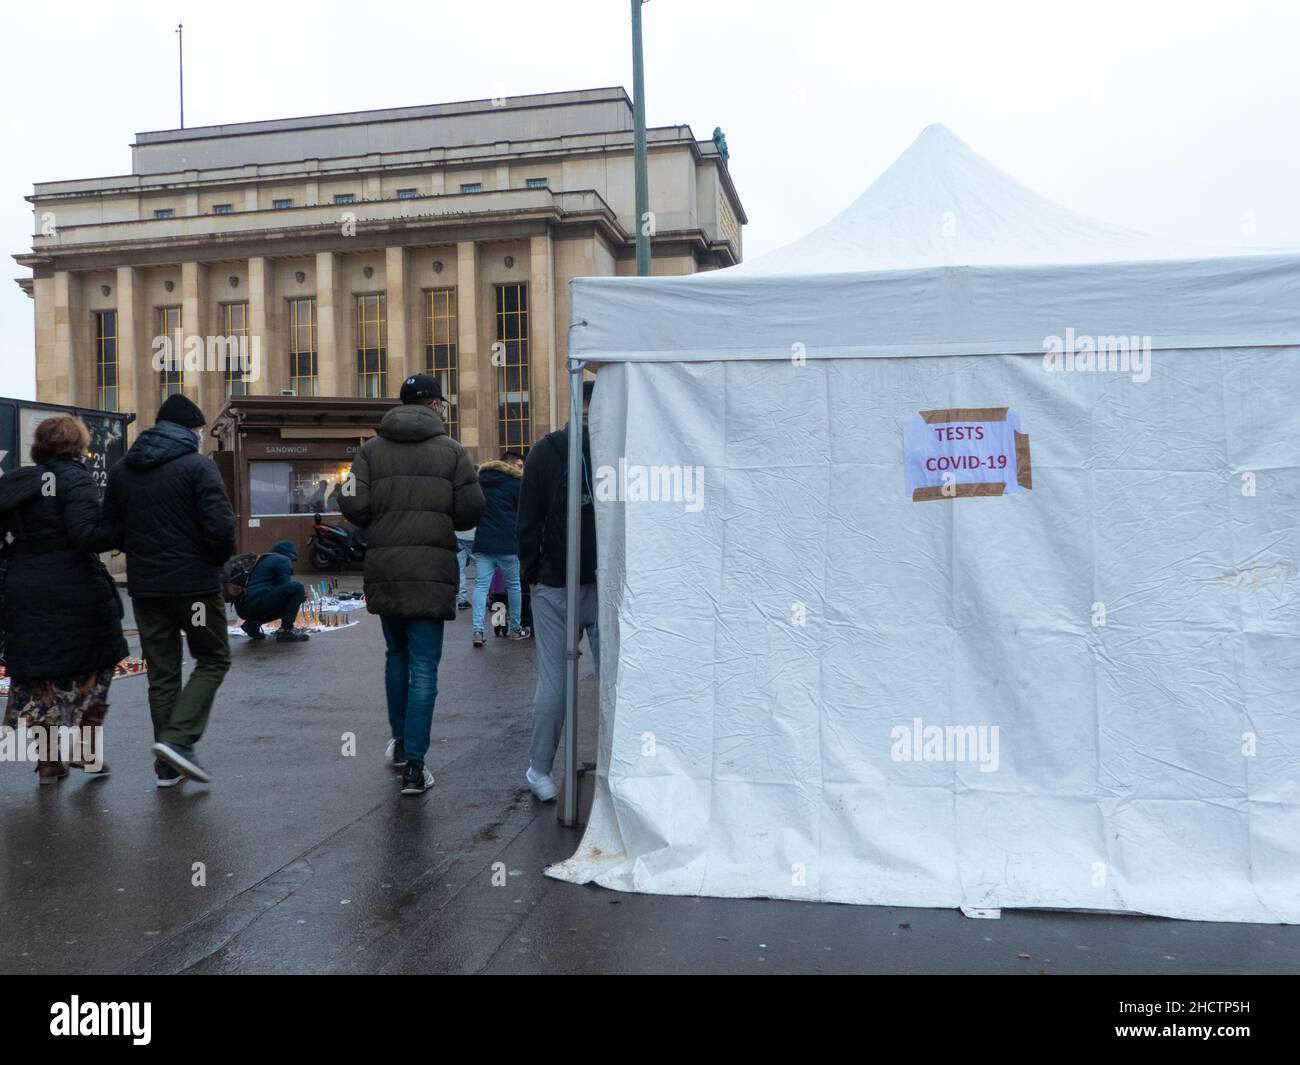 Paris, France. December 26. 2021. Tent housing  and testing centre for coronavirus, covid 19, in Trocadero district. Stock Photo